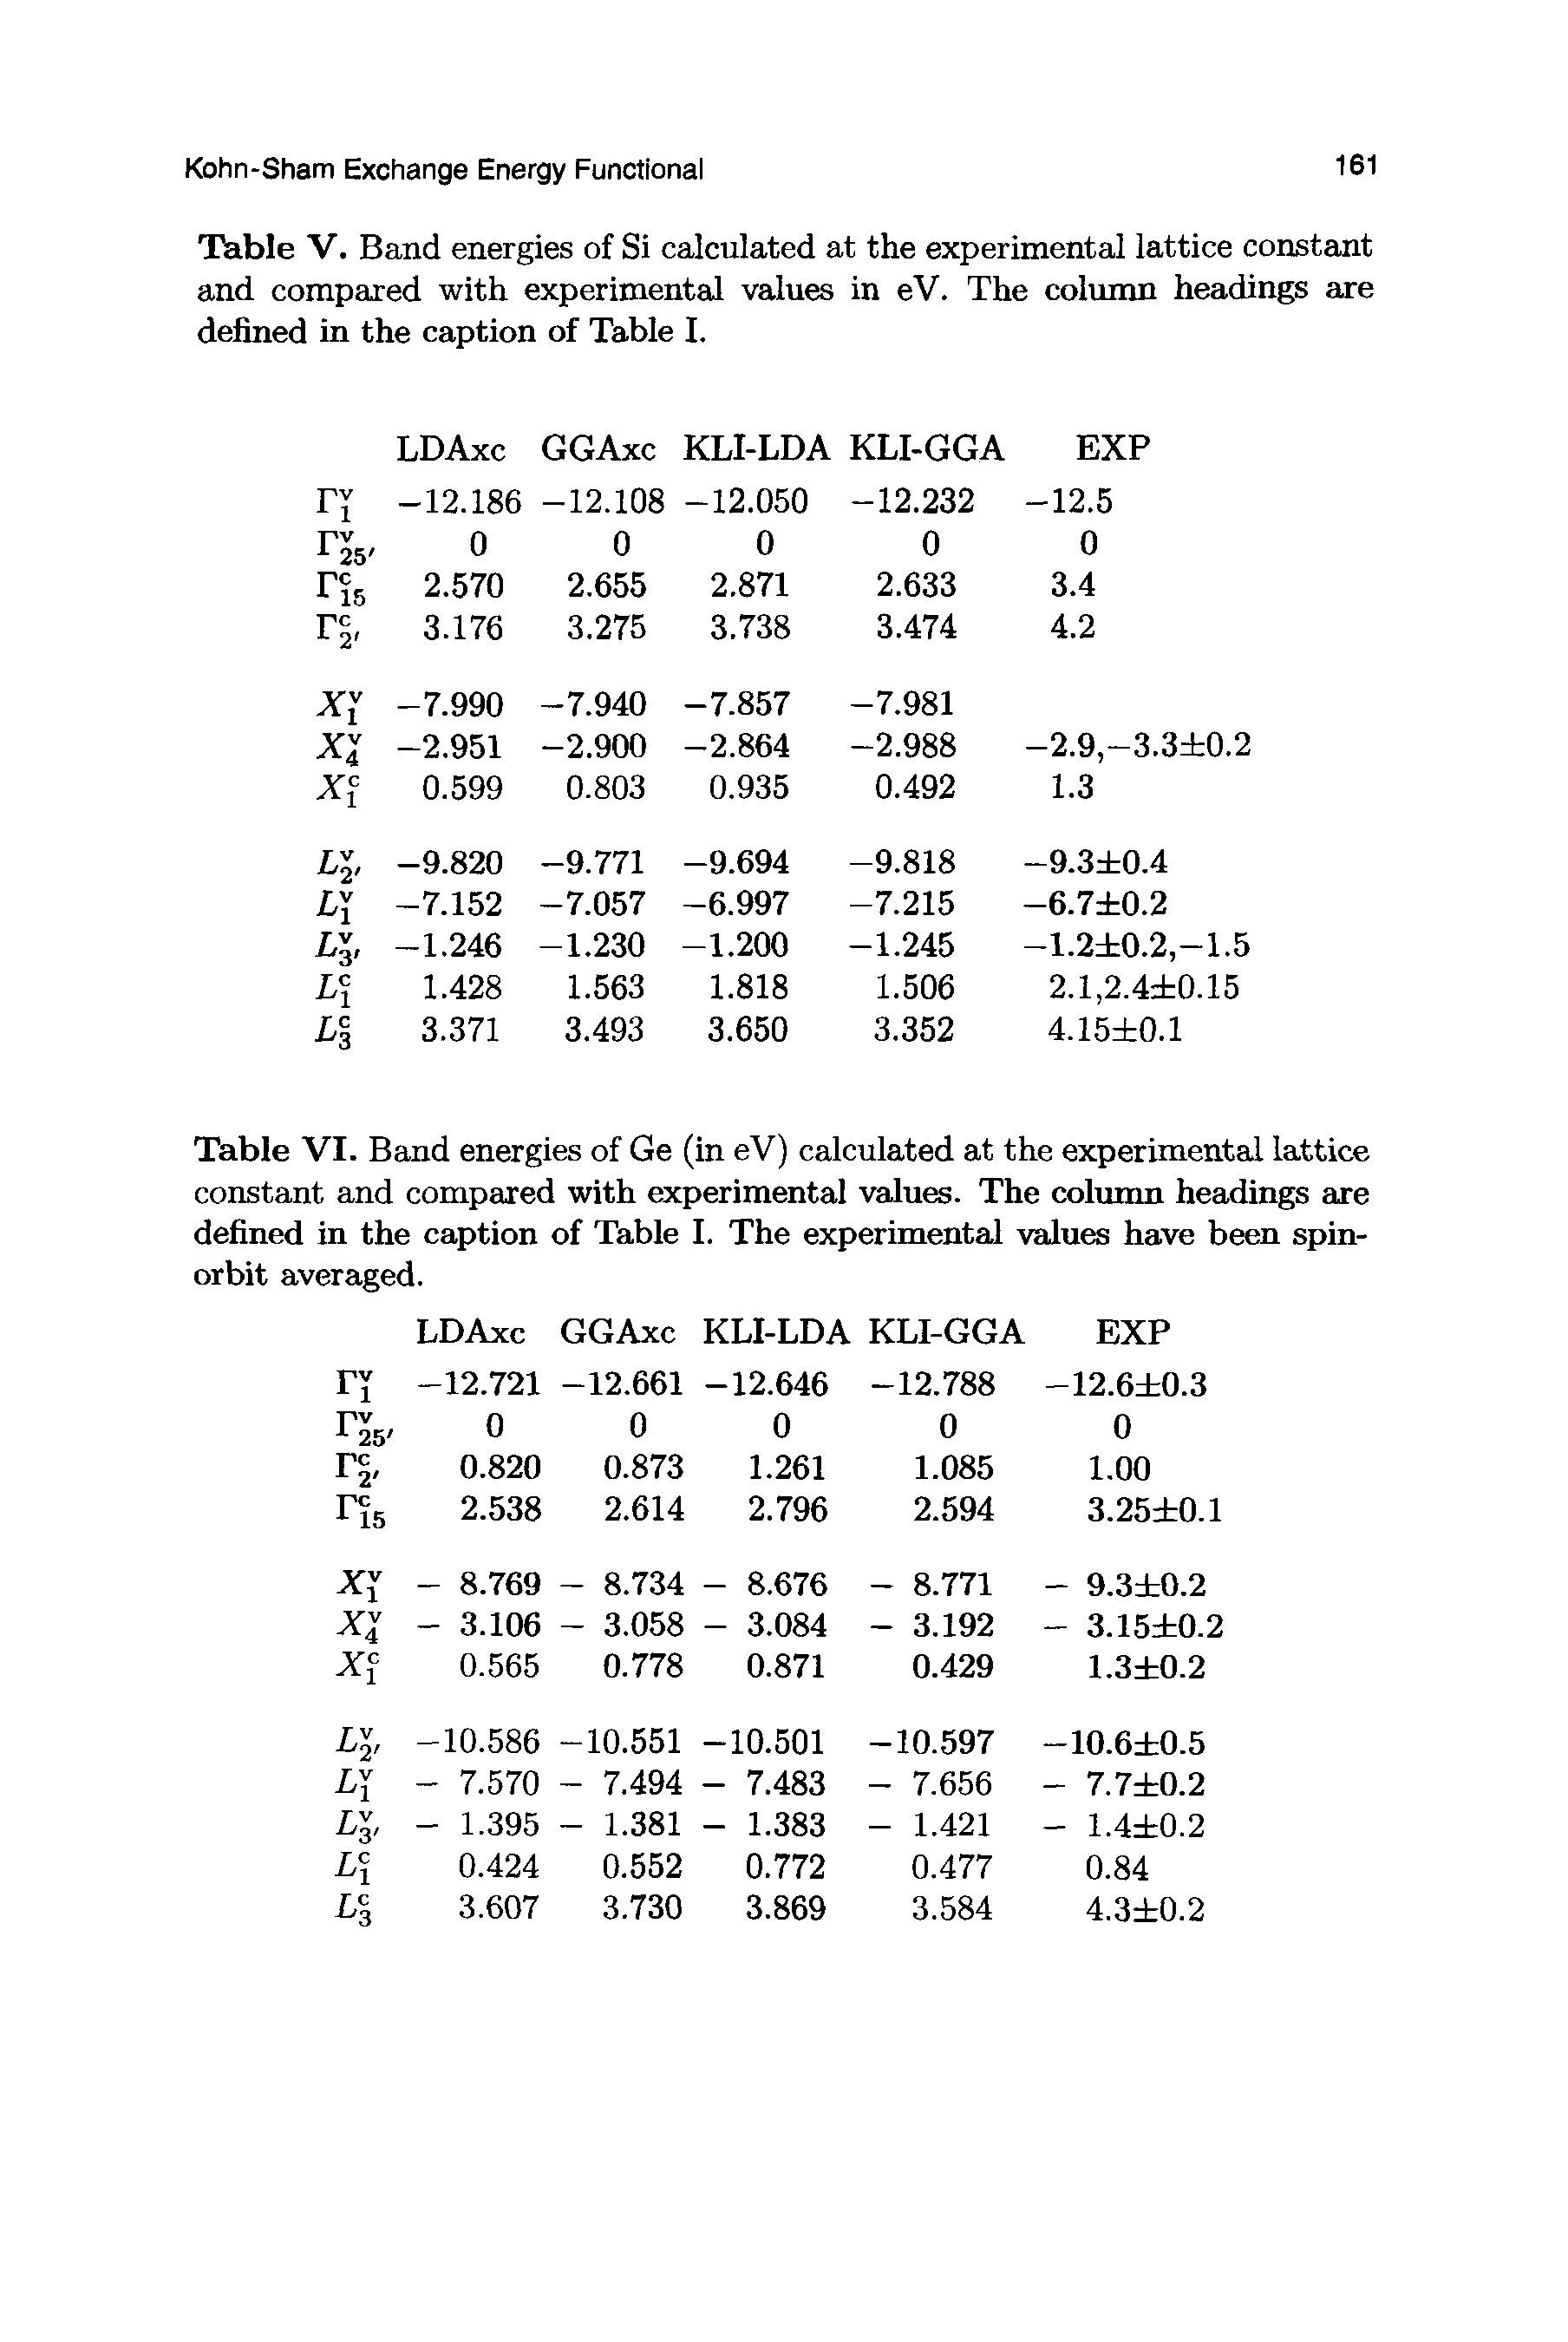 Table V. Band energies of Si calculated at the experimental lattice constant and compared with experimental values in eV. The column headings are defined in the caption of Table I.